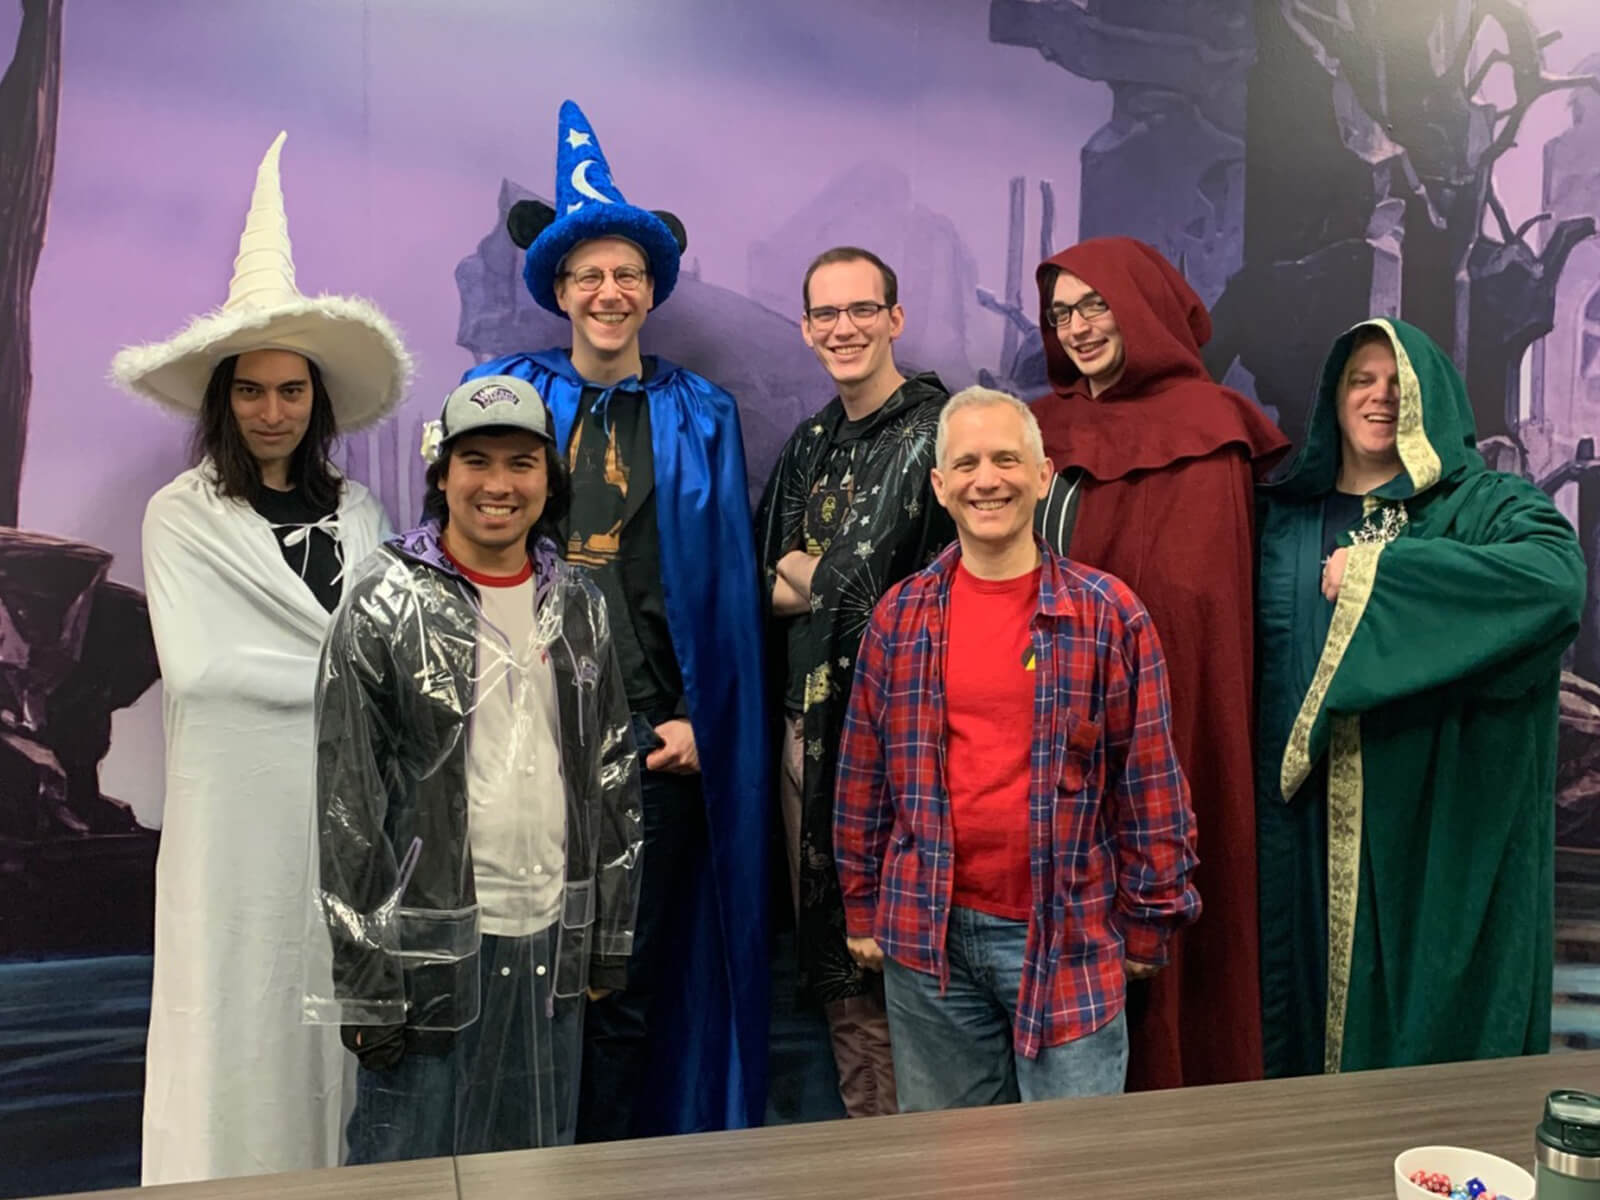 Corey Bowen and fellow Council of Colors members pose wearing variously colored wizard robes.